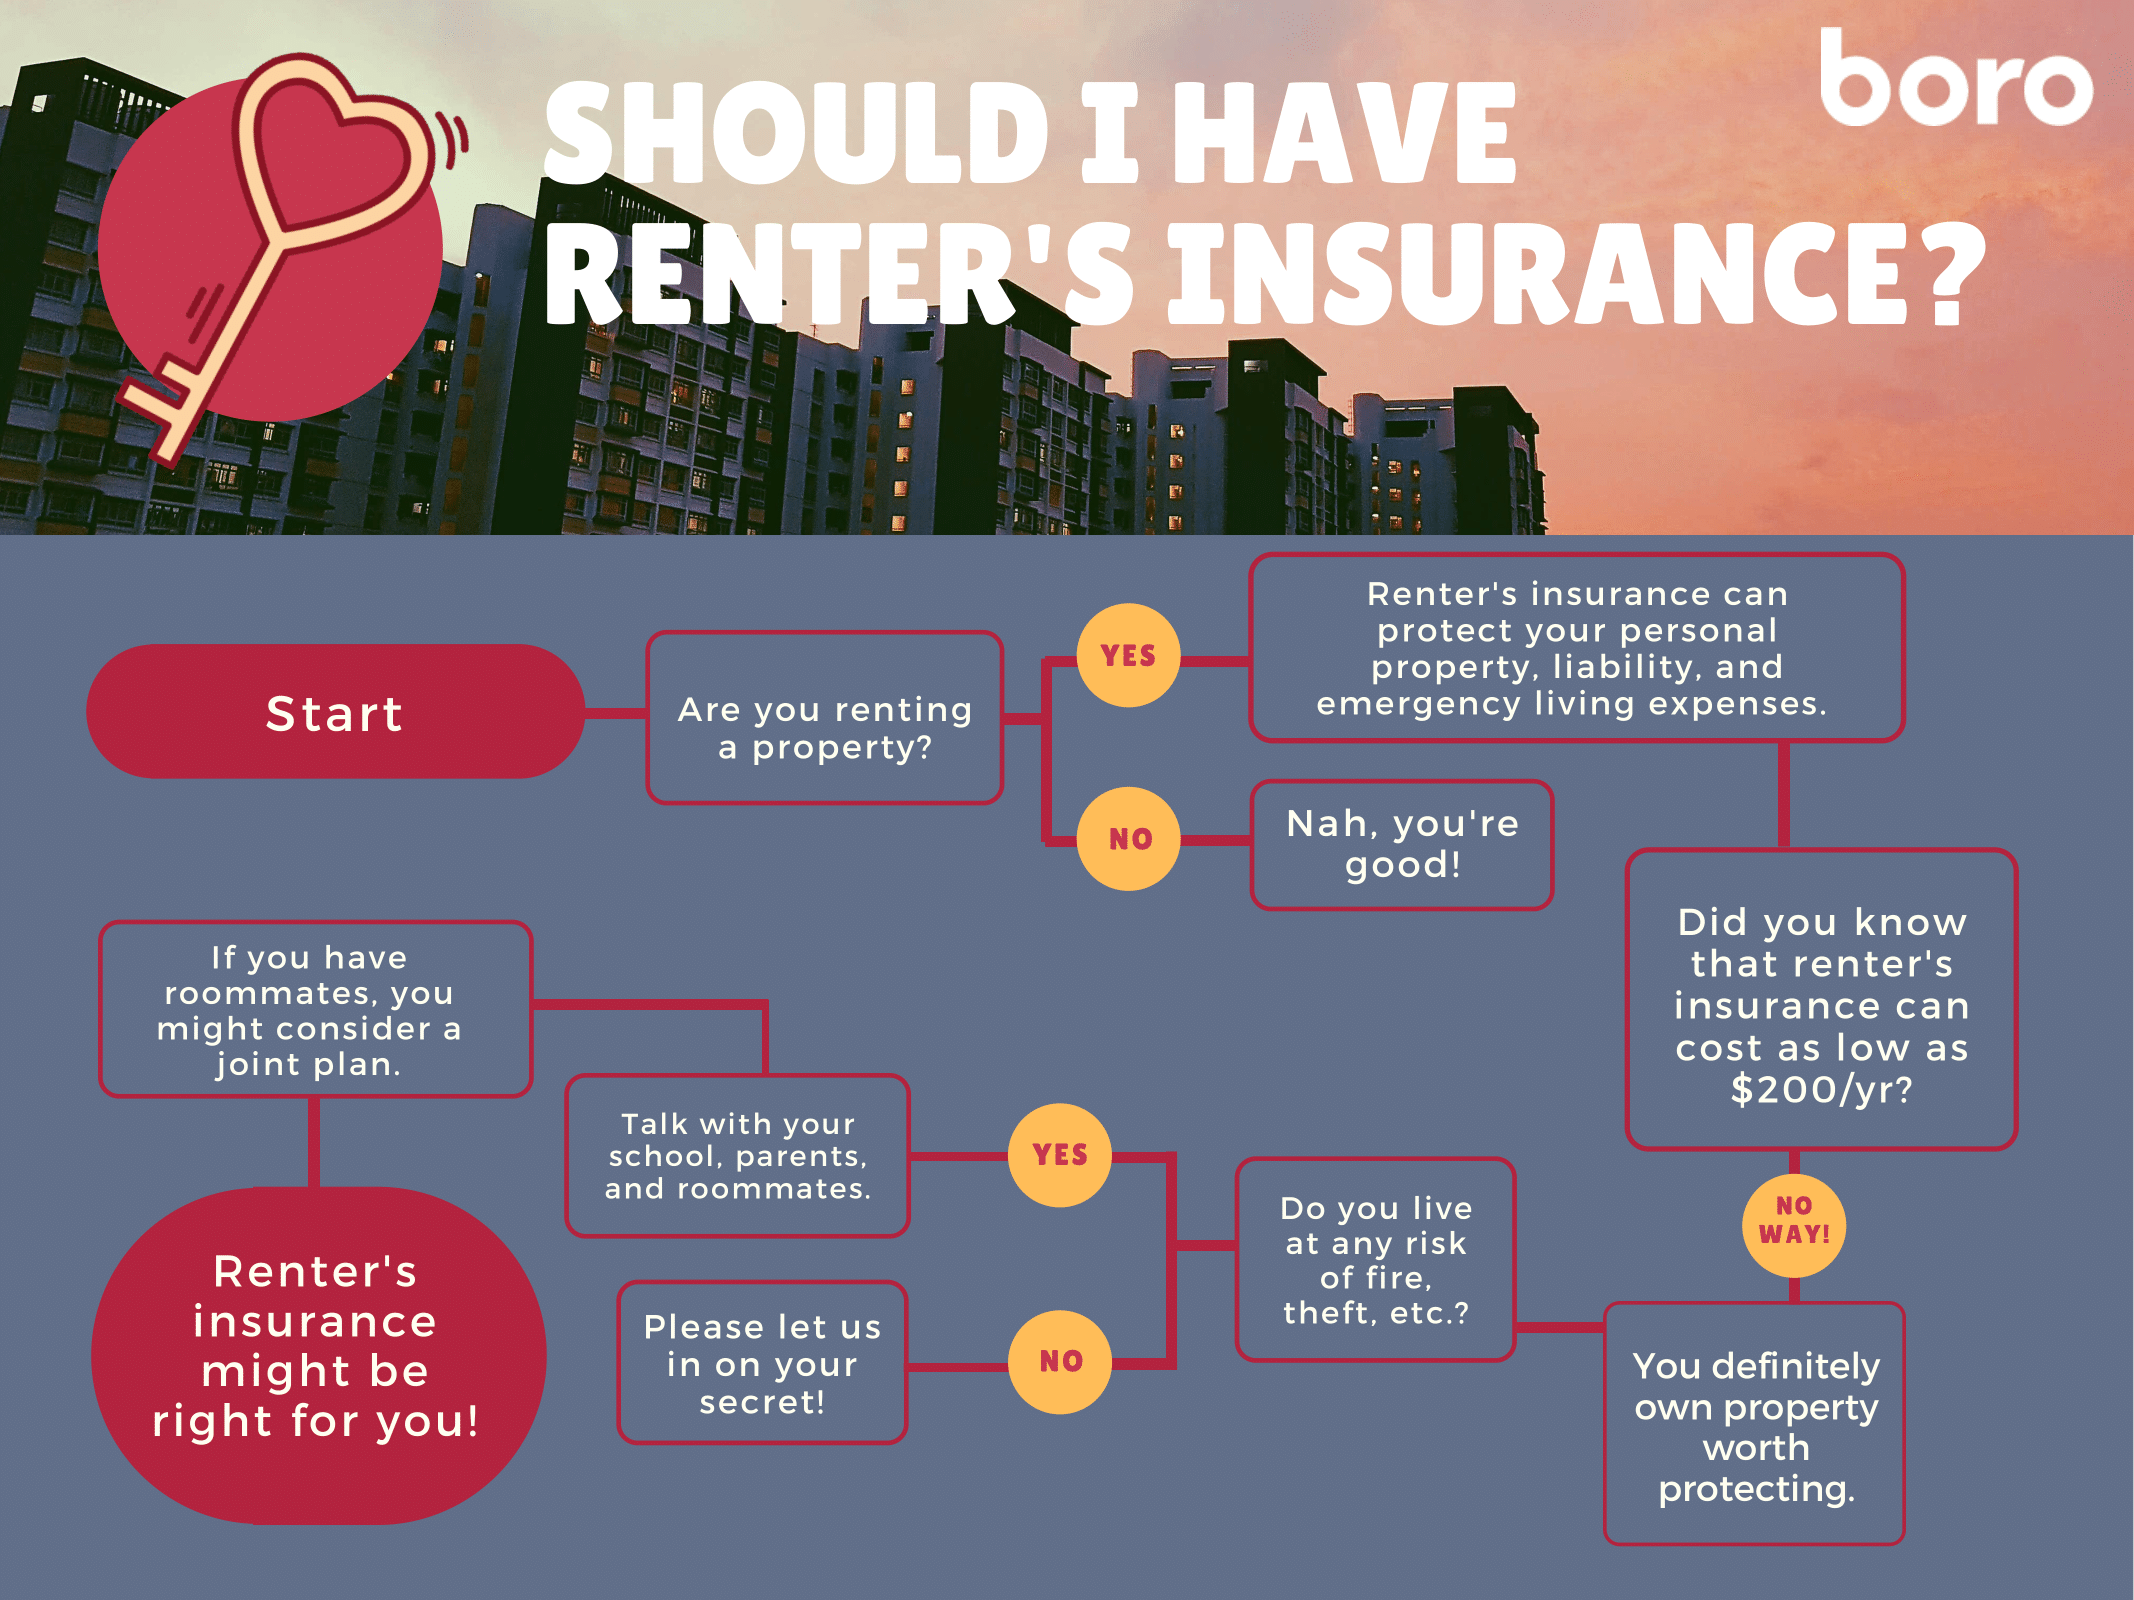 Should You Have Renter’s Insurance?